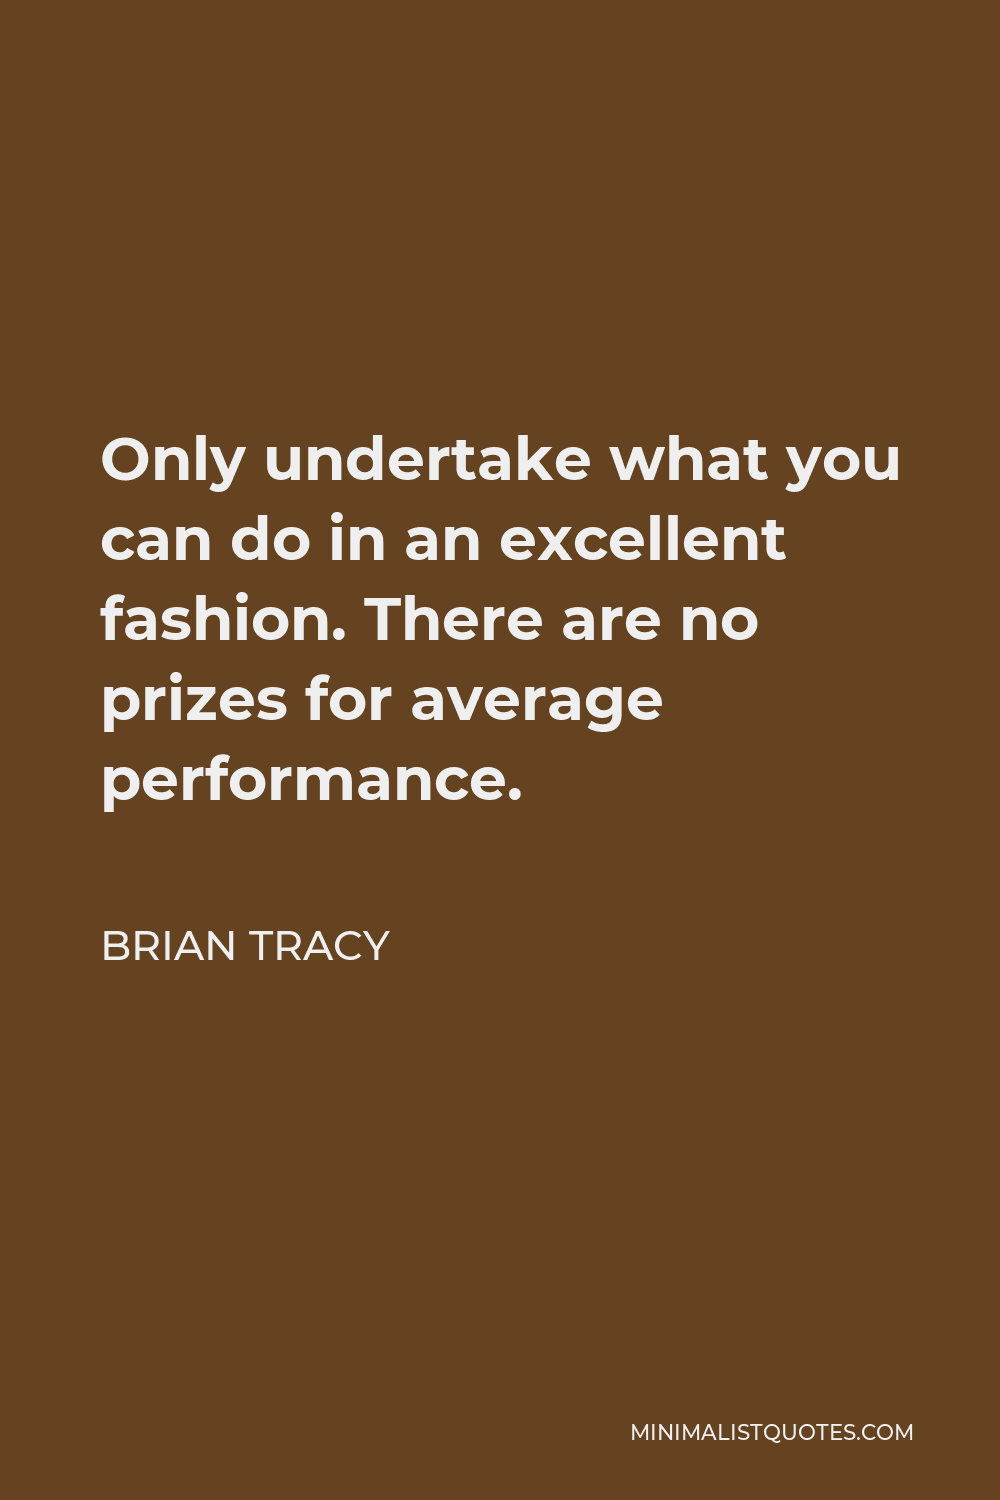 Brian Tracy Quote - Only undertake what you can do in an excellent fashion. There are no prizes for average performance.